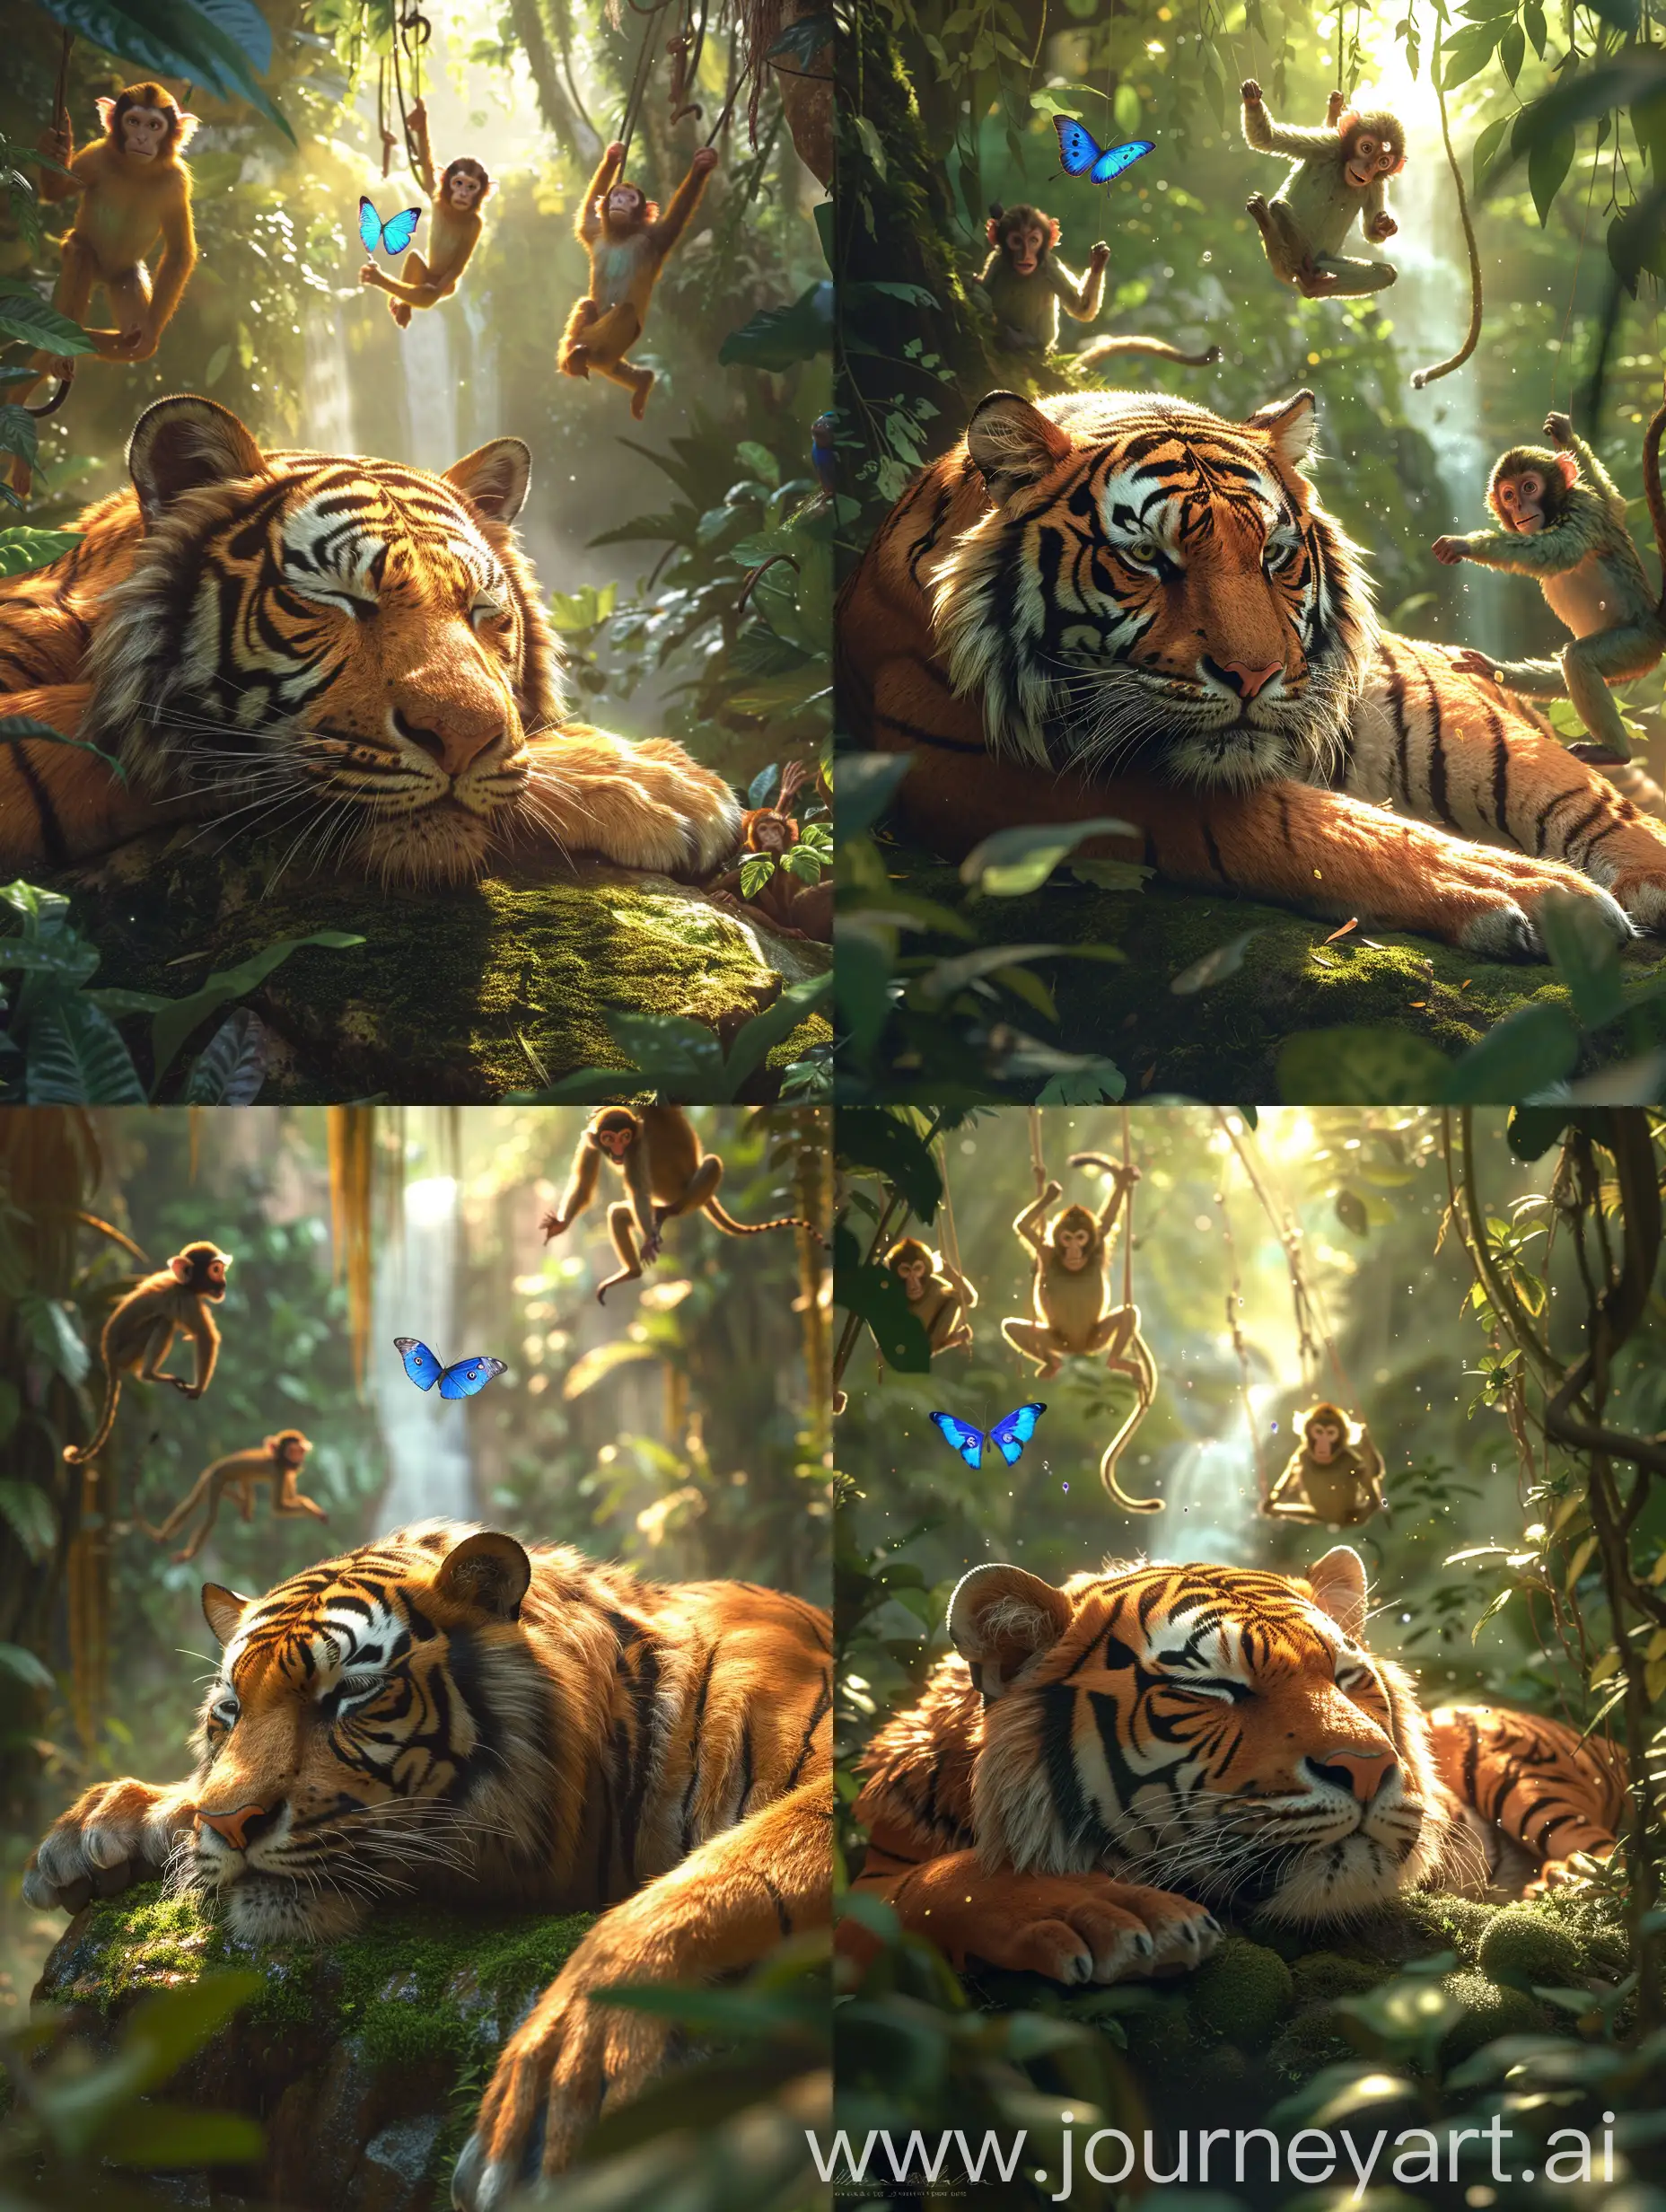 Scene: A sun-dappled clearing in a lush rainforest teeming with vibrant life.

Foreground: A majestic tiger, bathed in golden light, rests its head on a moss-covered rock. Its gaze is fixed on a playful group of monkeys swinging above in the lush canopy. Their long tails intertwine as they chatter and chase each other through the tangled branches.

Background: A vibrant blue morpho butterfly flutters past, its iridescent wings shimmering like stained glass against the backdrop of emerald foliage. In the distance, a gentle mist rises from a hidden waterfall, creating a sense of mystery and tranquility.

Details:

The tiger's fur is a rich blend of orange and black, with white accents around its eyes.
The monkeys are a variety of species, including spider monkeys with long limbs and playful gibbons known for their acrobatic abilities.
The morpho butterfly's wings display a mesmerizing kaleidoscope of blue, green, and purple.
The sunlight filters through the leaves, casting dappled light on the forest floor and creating a magical atmosphere.

Mood:

The overall mood should be one of peace, harmony, and vibrant life. The image should capture the wonder and beauty of the natural world, and the interactions between the different animals should feel both captivating and heartwarming. --s 750